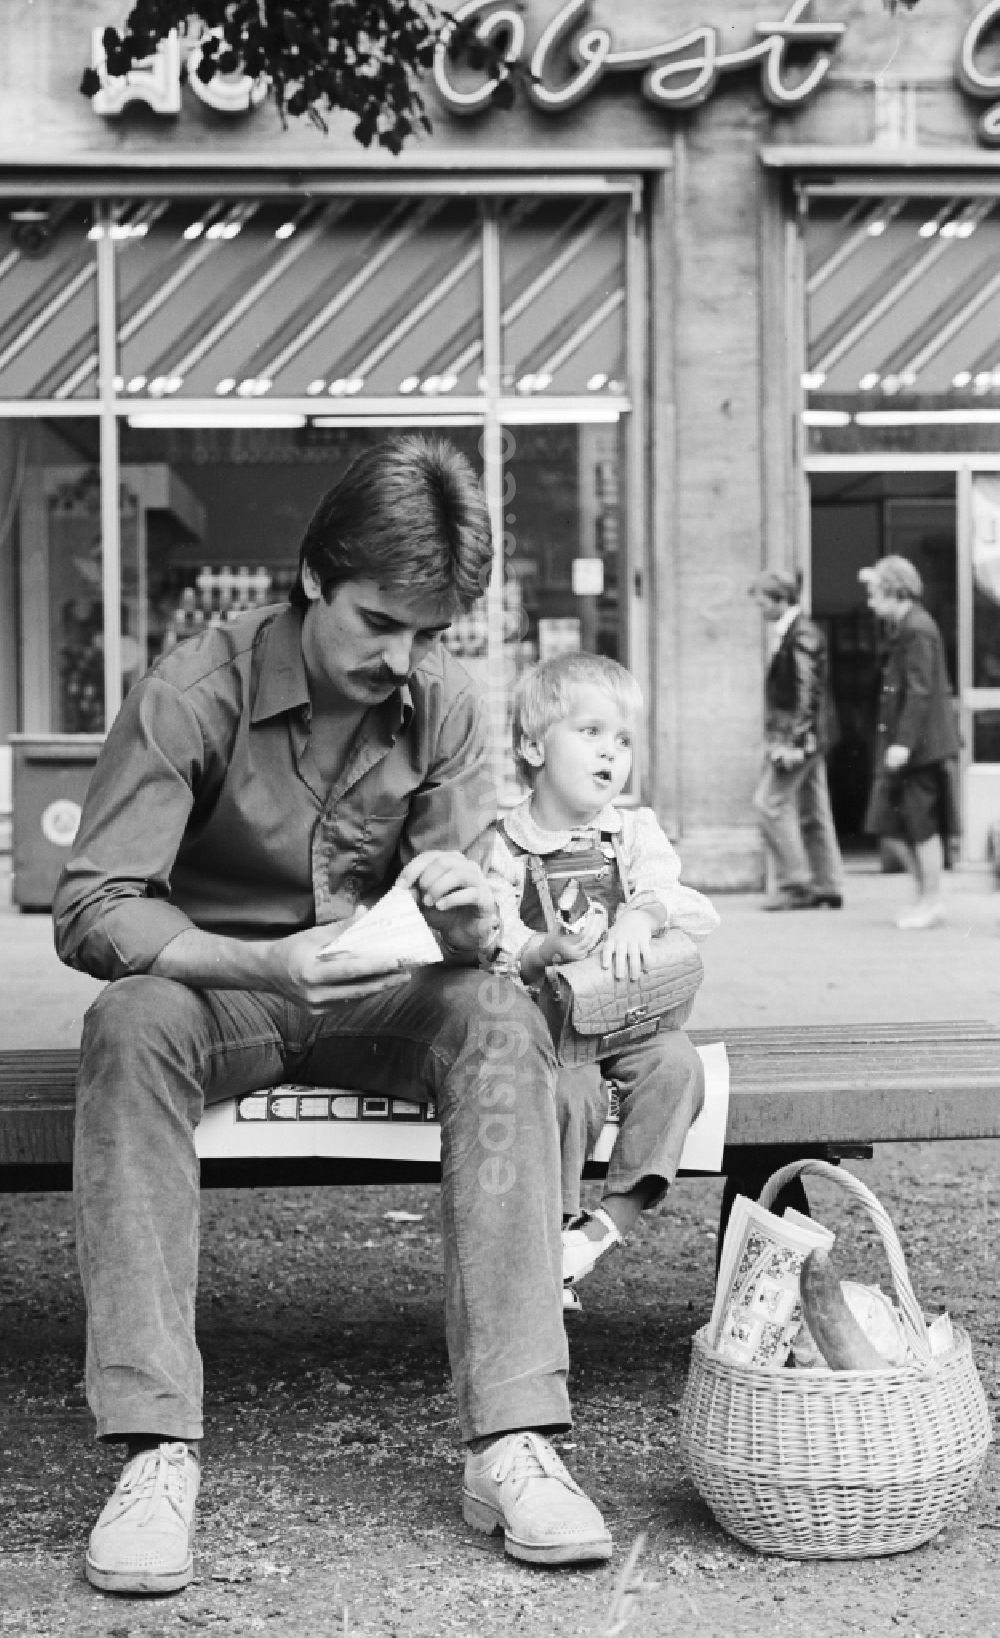 GDR photo archive: Berlin - A father sitting with his child on a bench in the Karl-Marx-Allee in Berlin, the former capital of the GDR, the German Democratic Republic